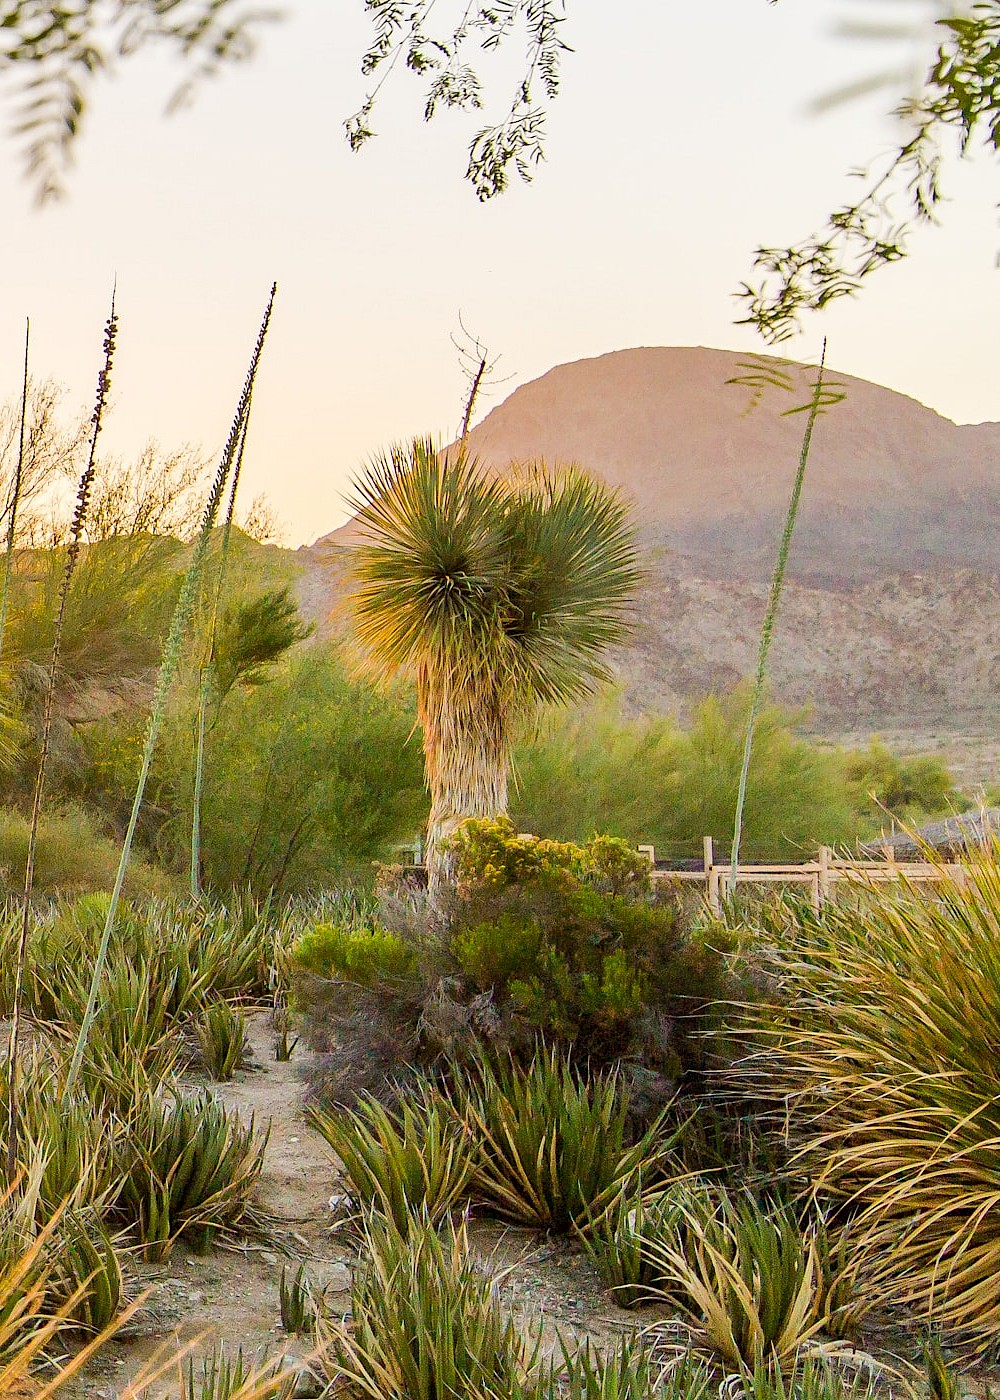 Enjoy beautiful sunsets over the horizon when you visit The Living Desert Zoo and Gardens.